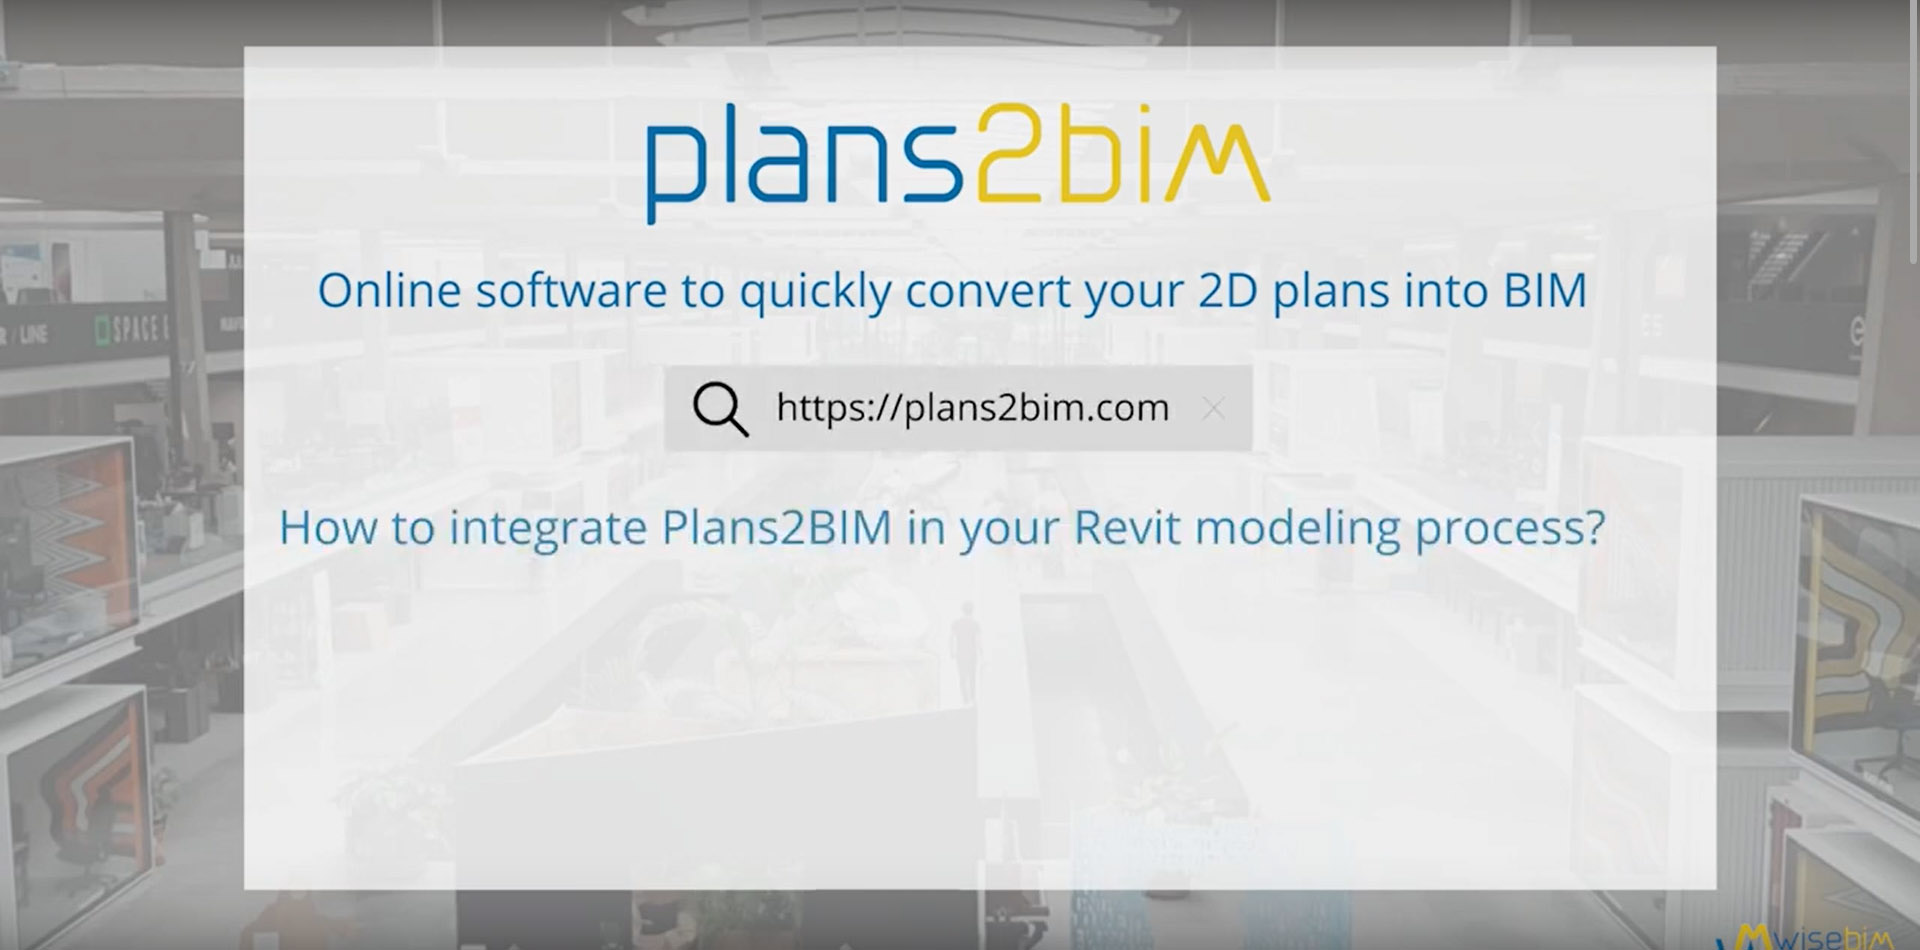 How to integrate Plans2BIM in your Revit modeling process